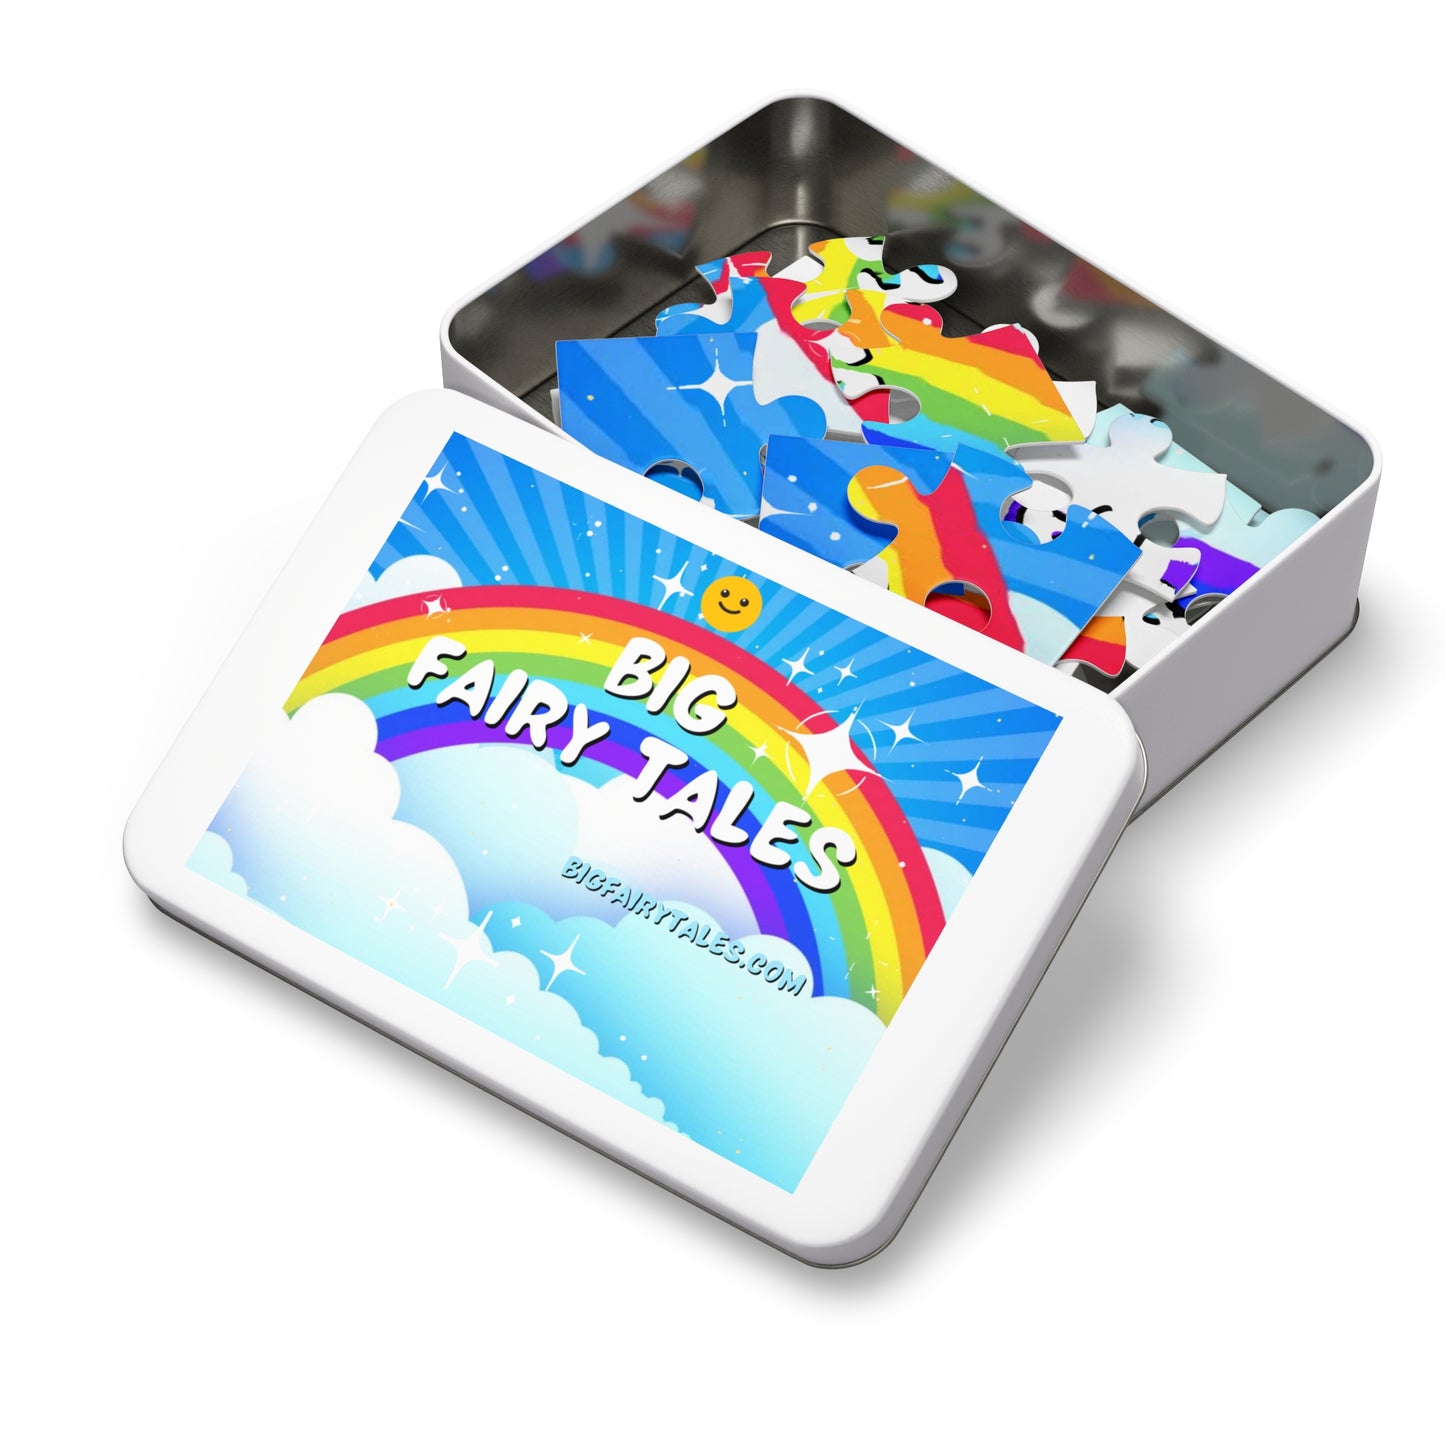 Sunny Day Rainbow Puzzle From Big Fairy Tales By Schatar